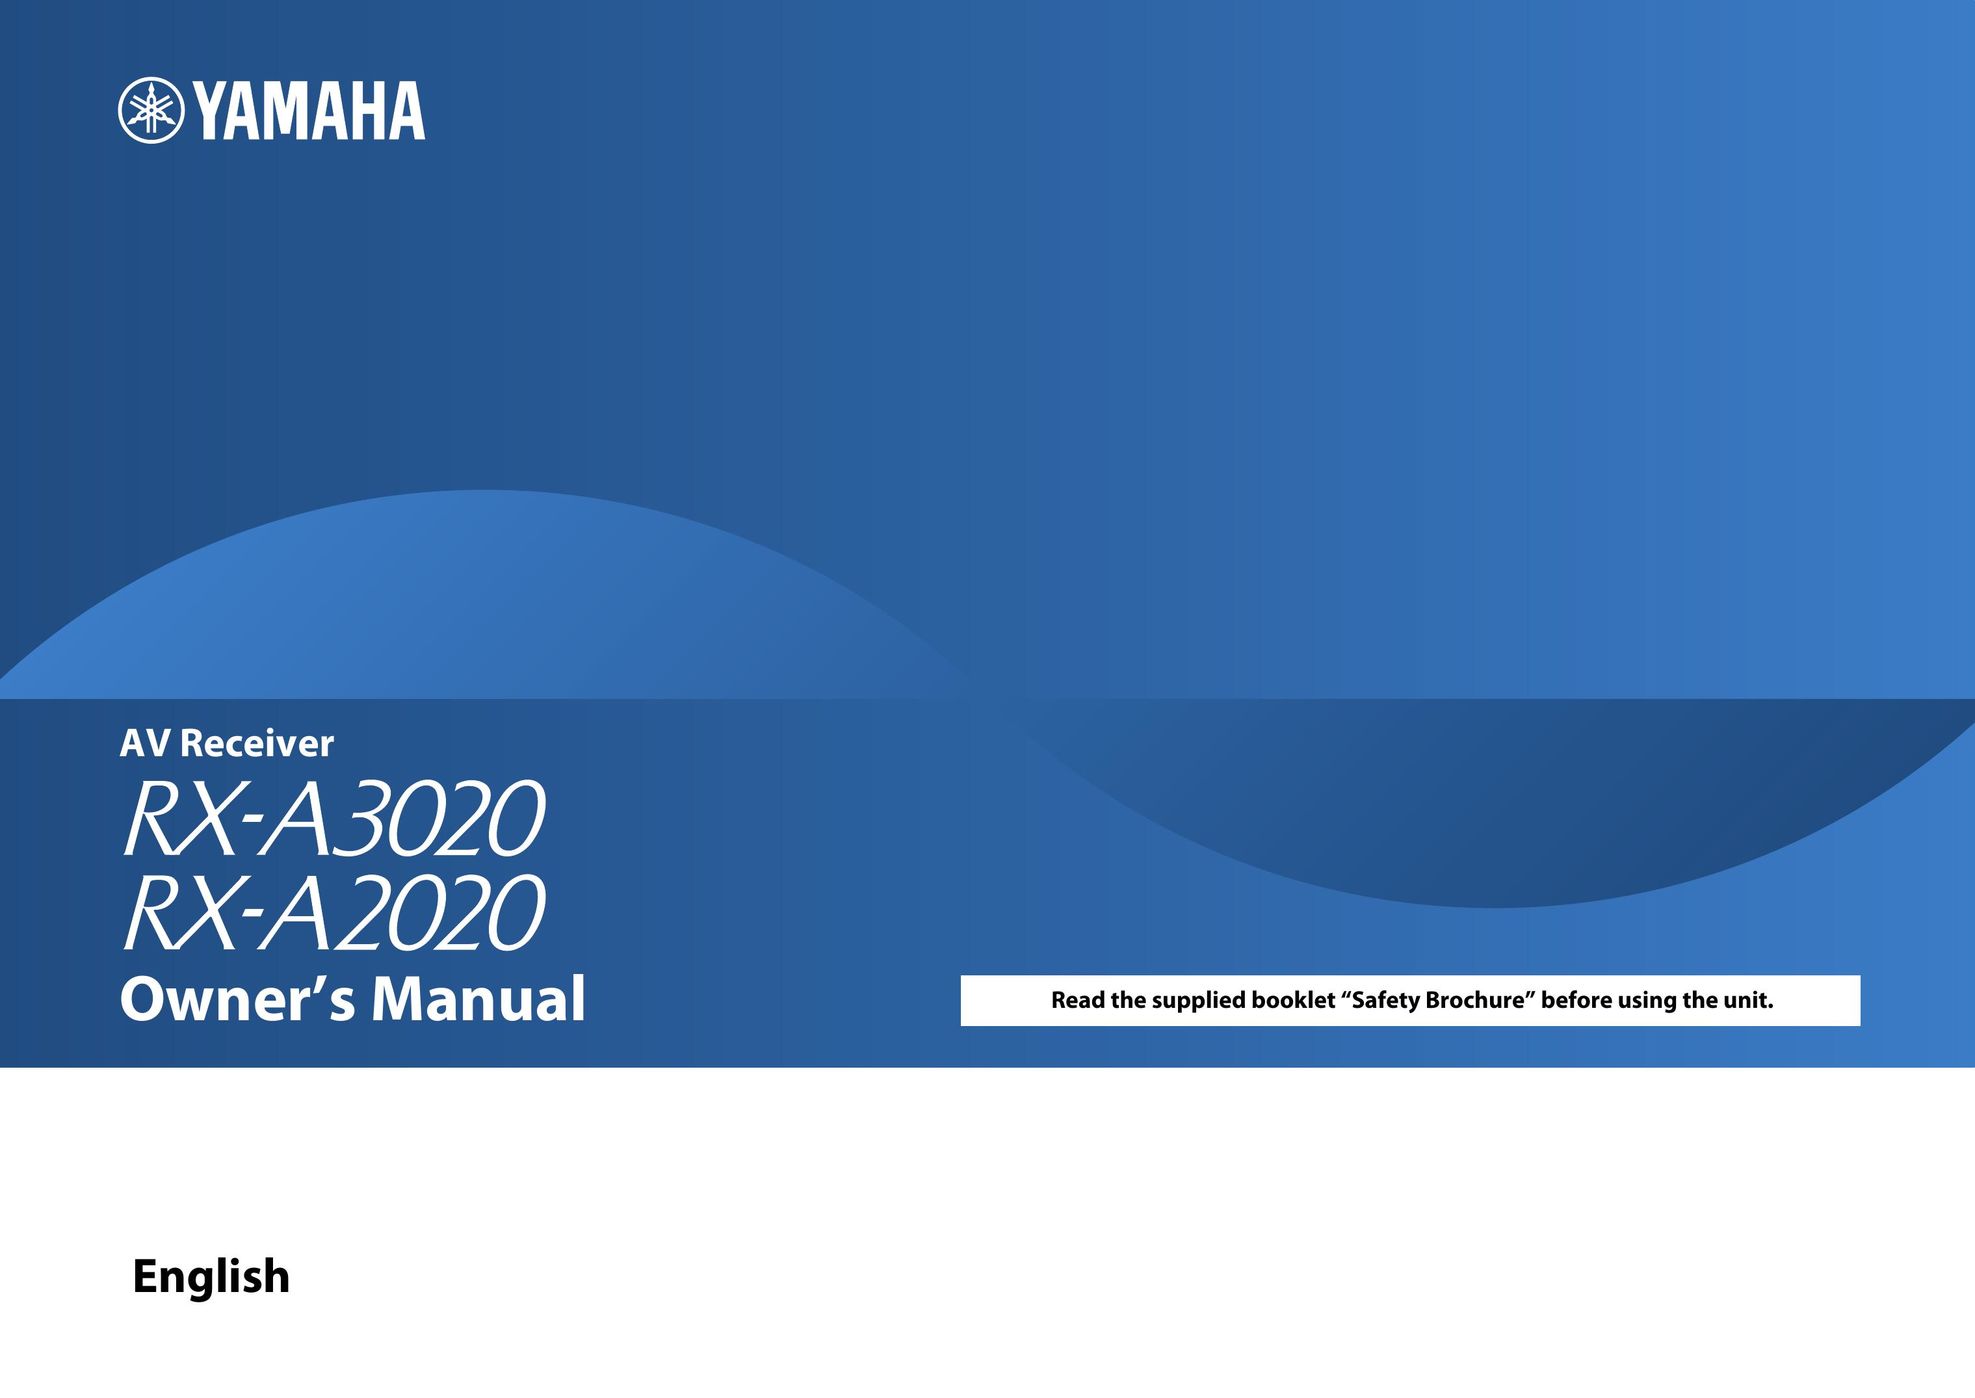 Yamaha AVENTAGE RX-A3020 Stereo Receiver User Manual